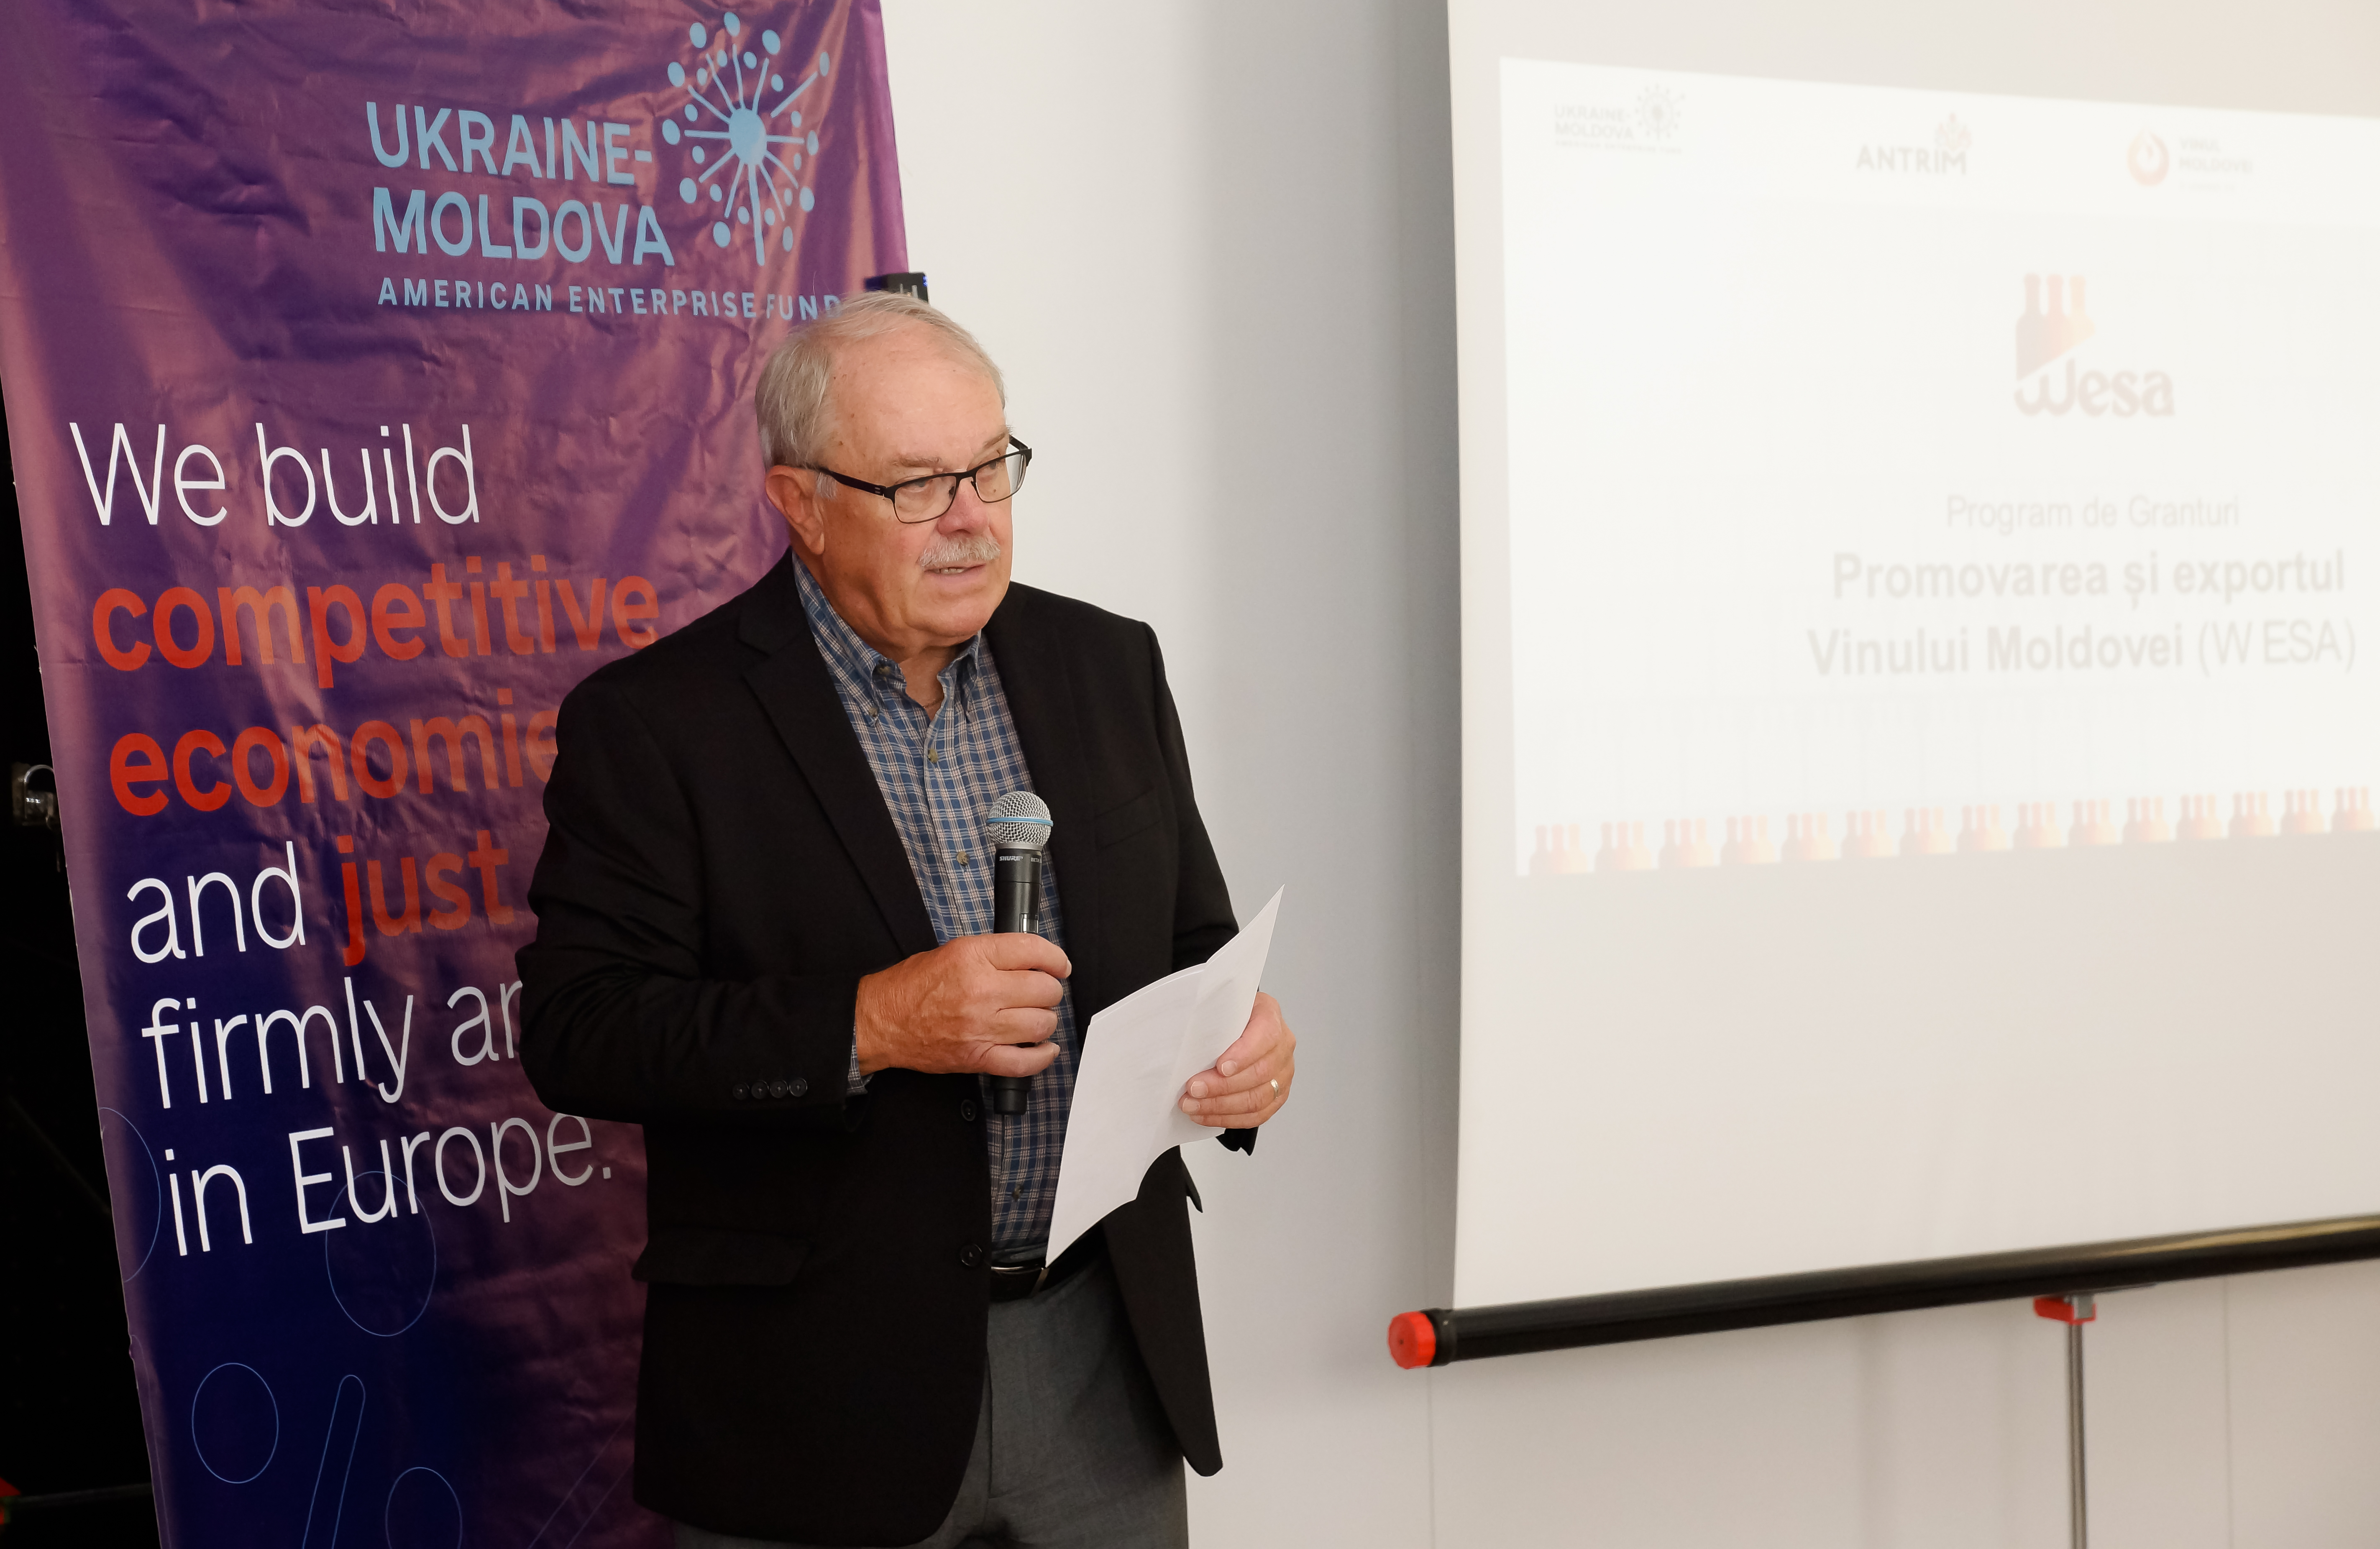 WESA grant program for Moldovan wine exporters is launched with the support of Ukraine-Moldova American Enterprise Fund image